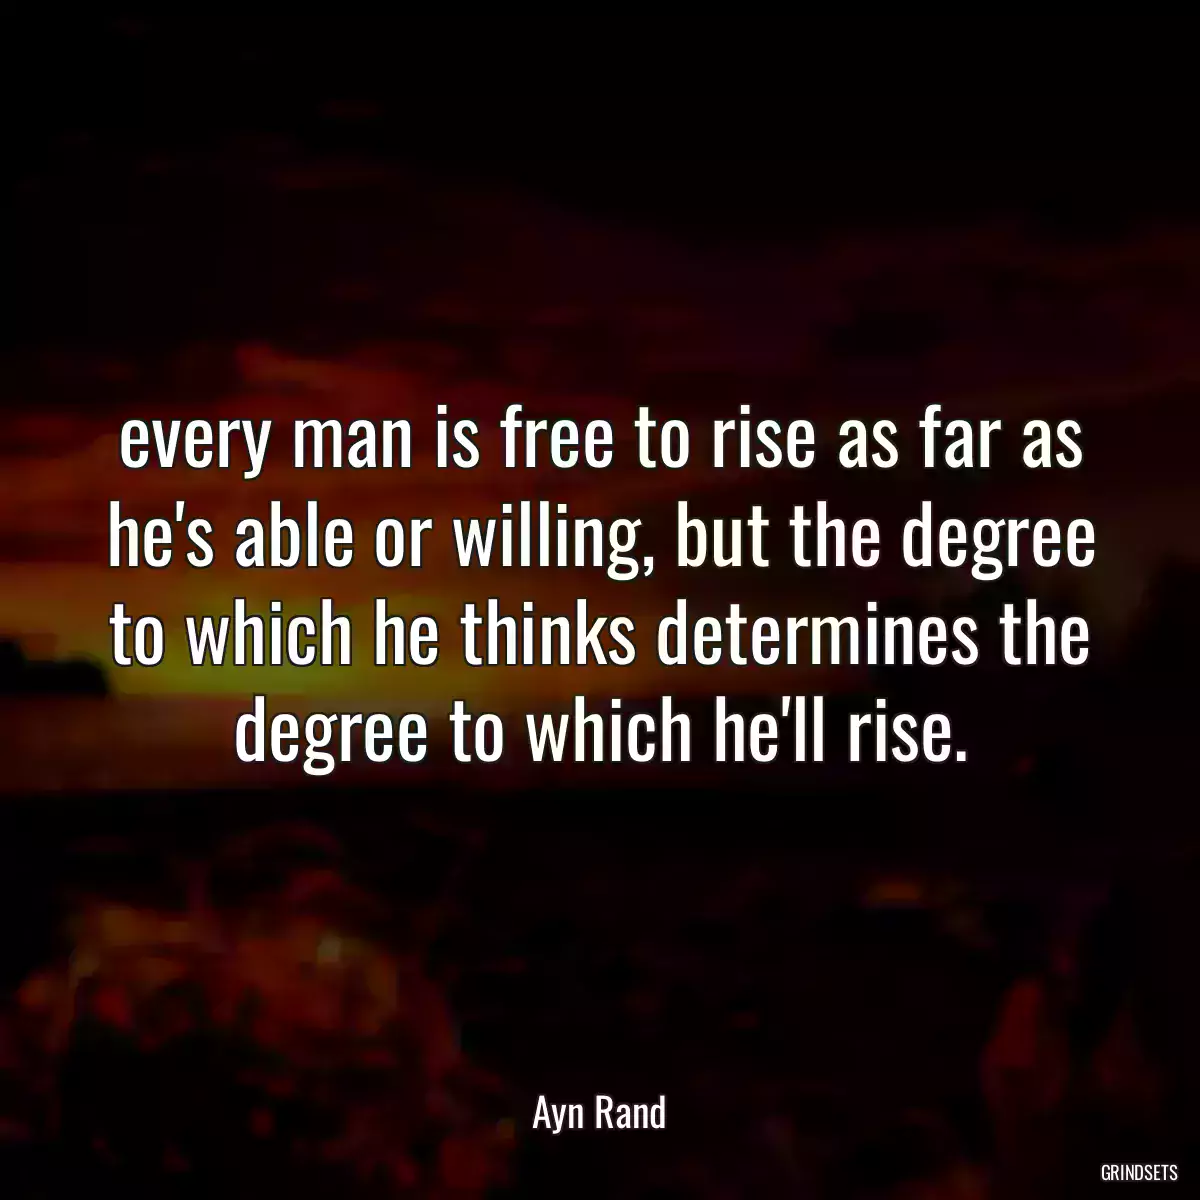 every man is free to rise as far as he\'s able or willing, but the degree to which he thinks determines the degree to which he\'ll rise.